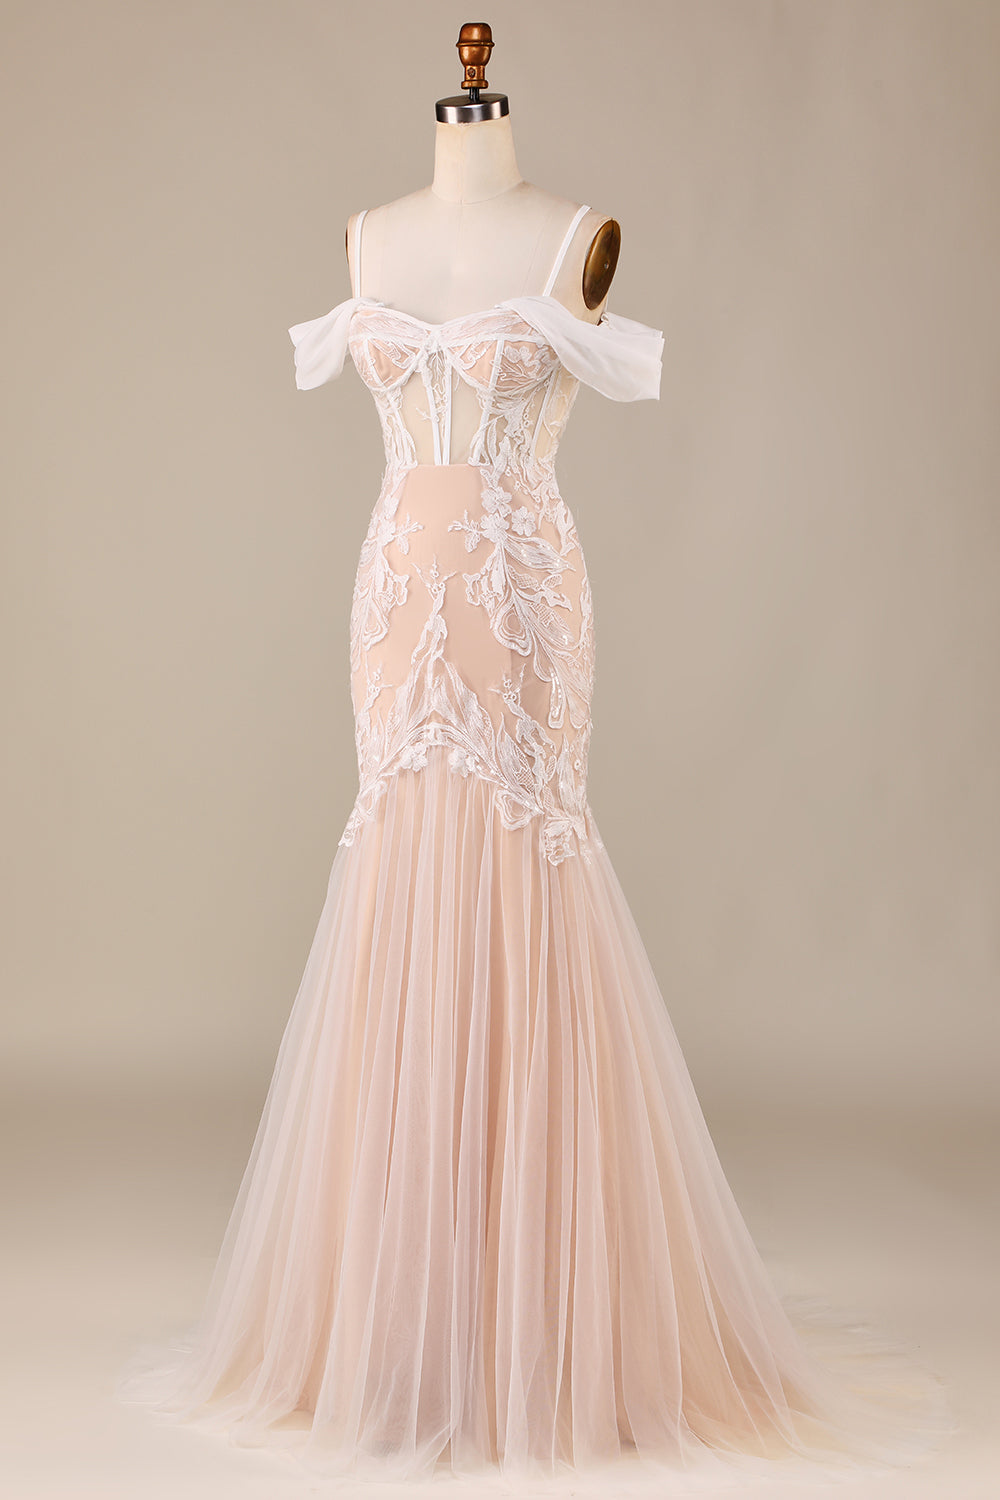 Champagne Mermaid Long Wedding Dress with Lace